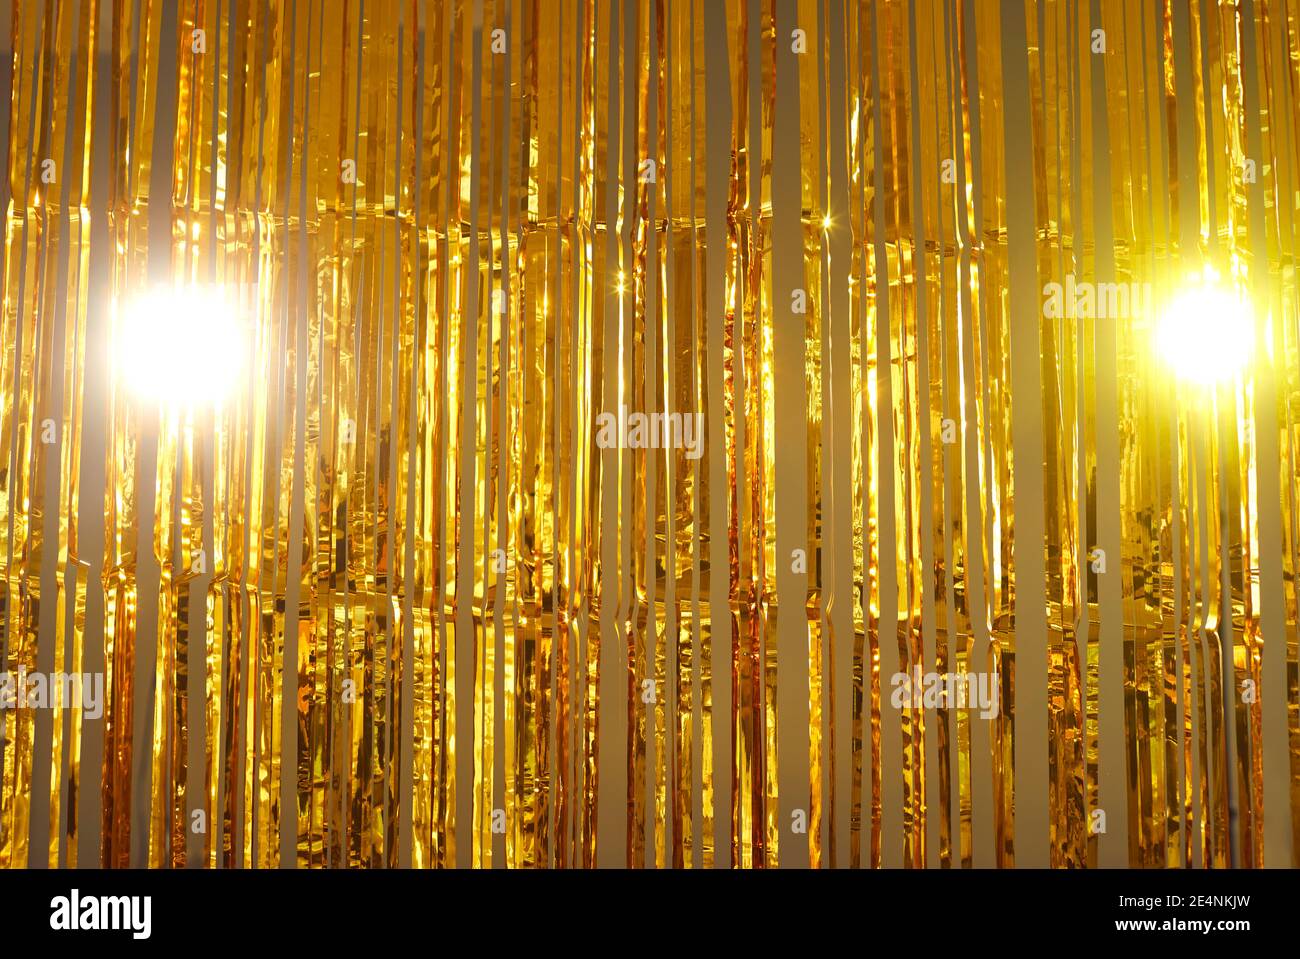 Golden foil fringe curtains hung as interior decor or backdrop for photo at a party Stock Photo